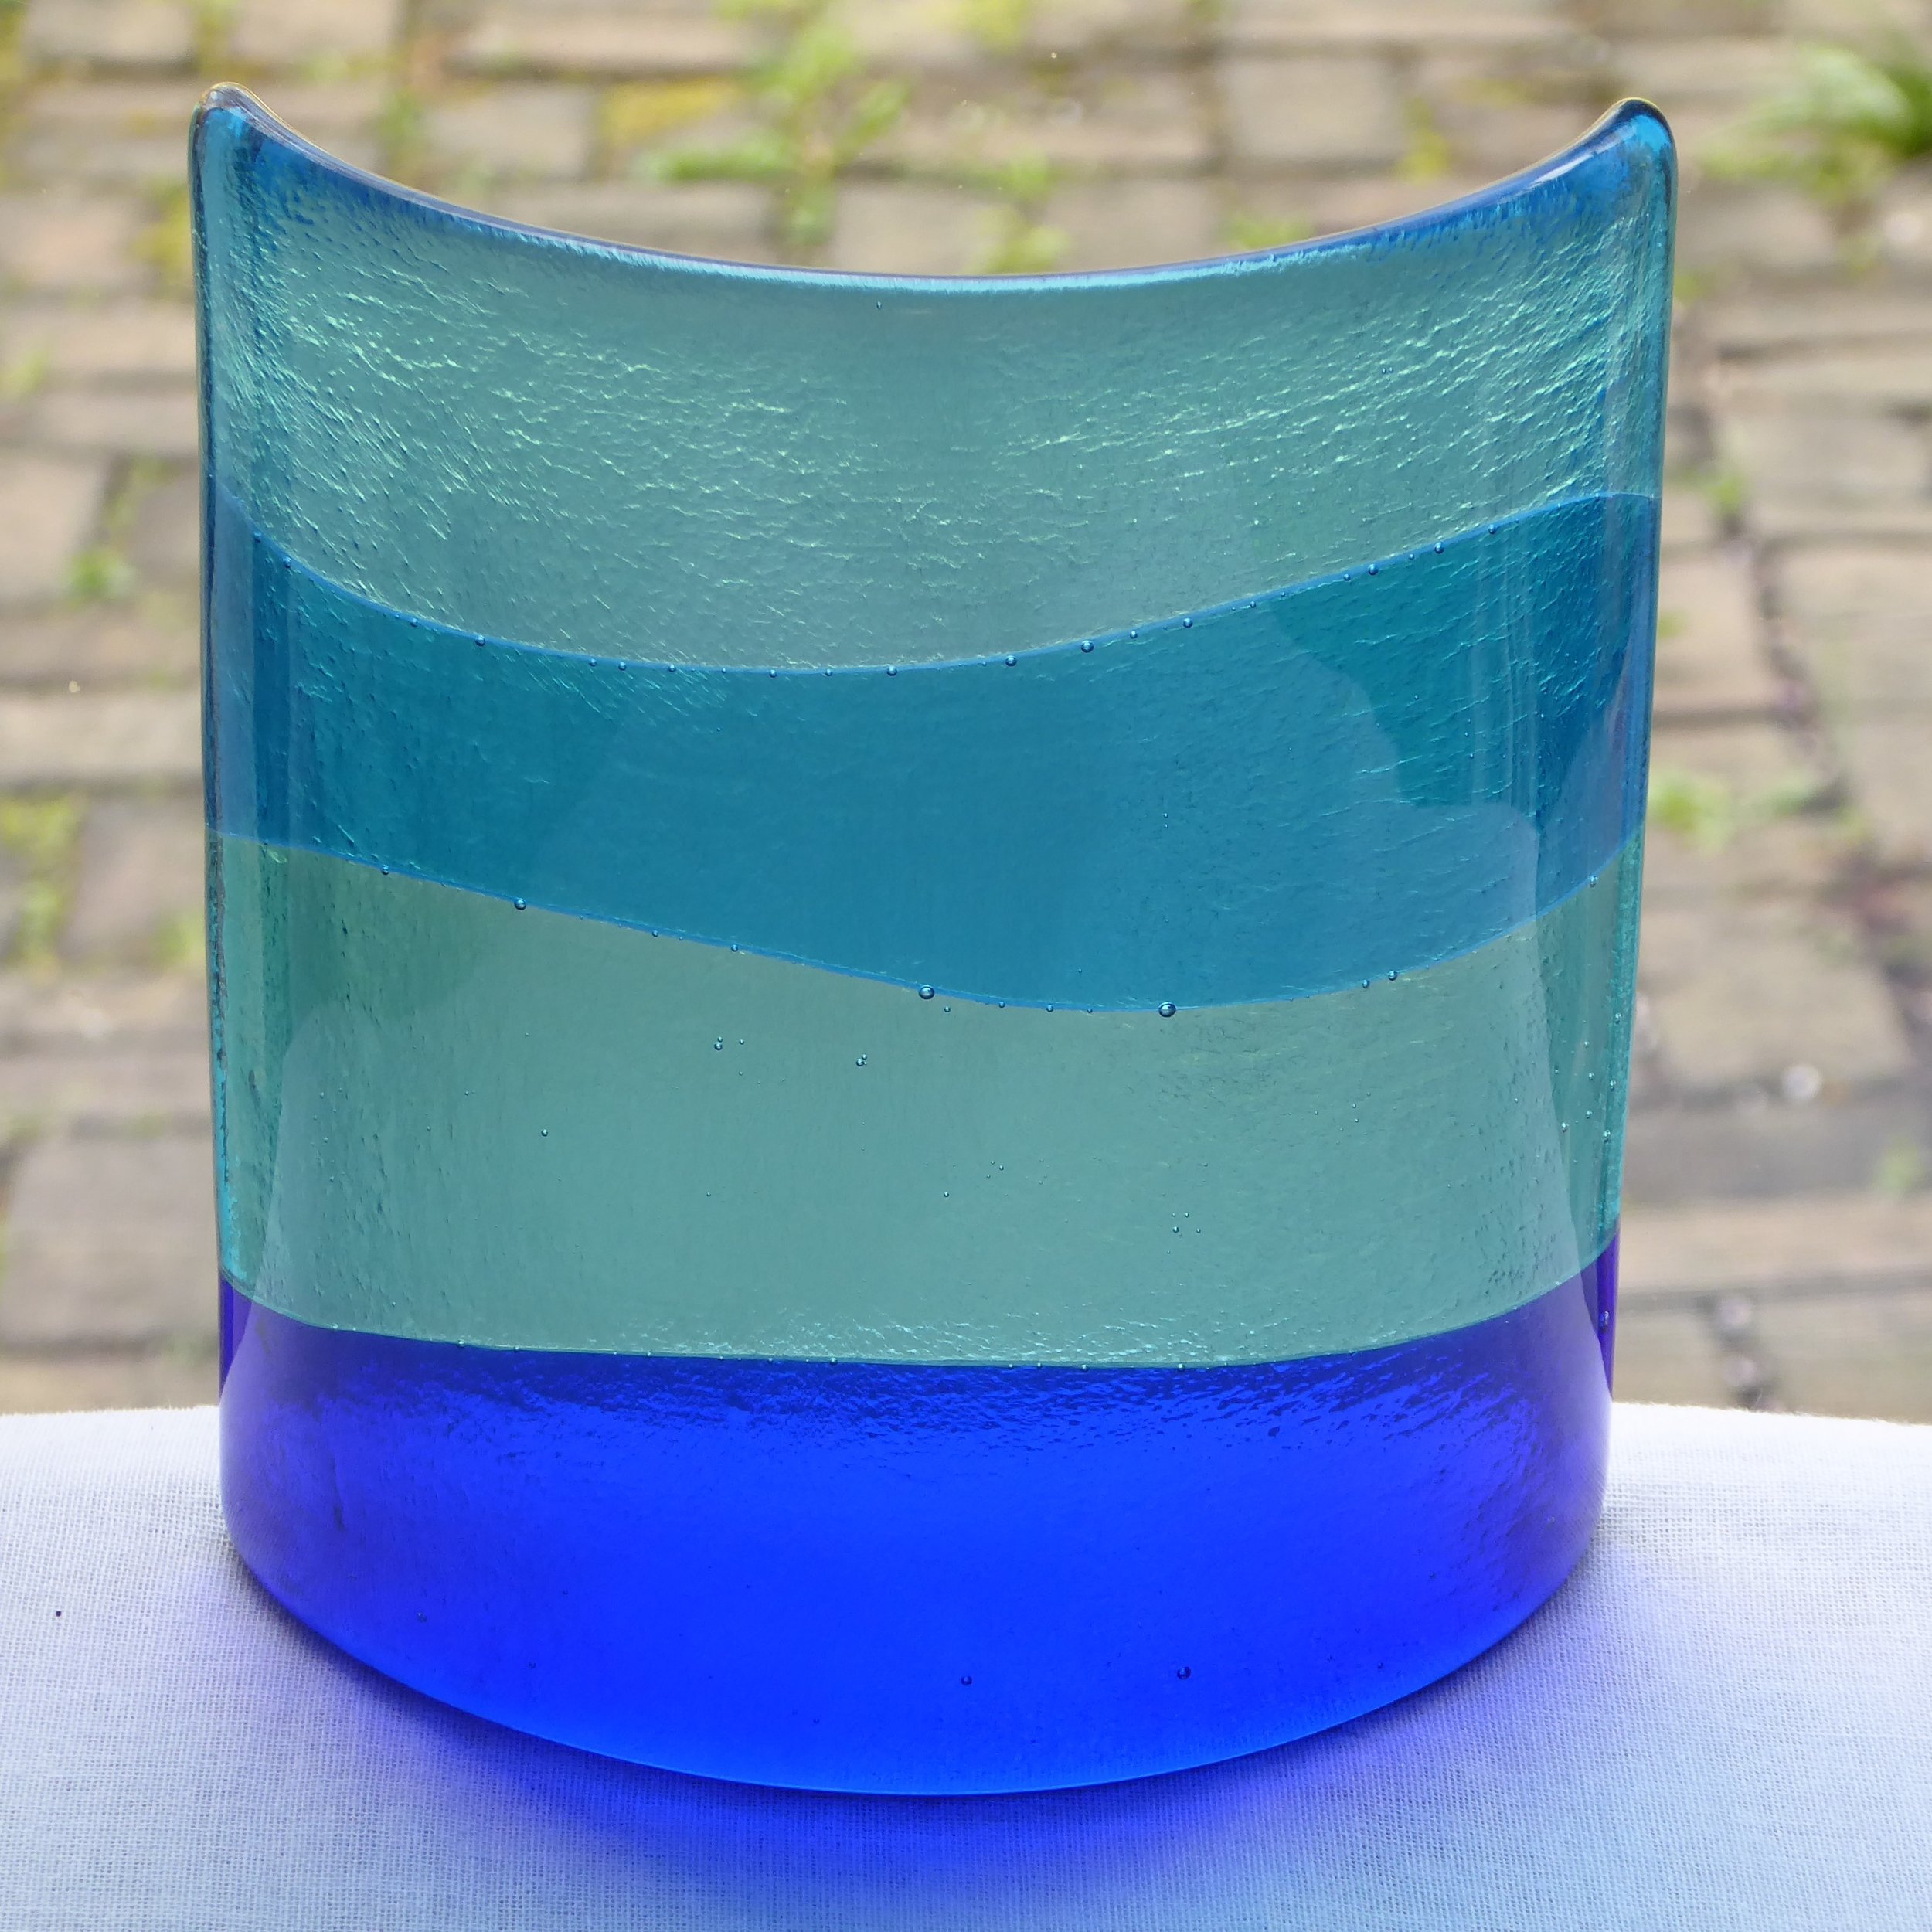 Blue window/candle lamp